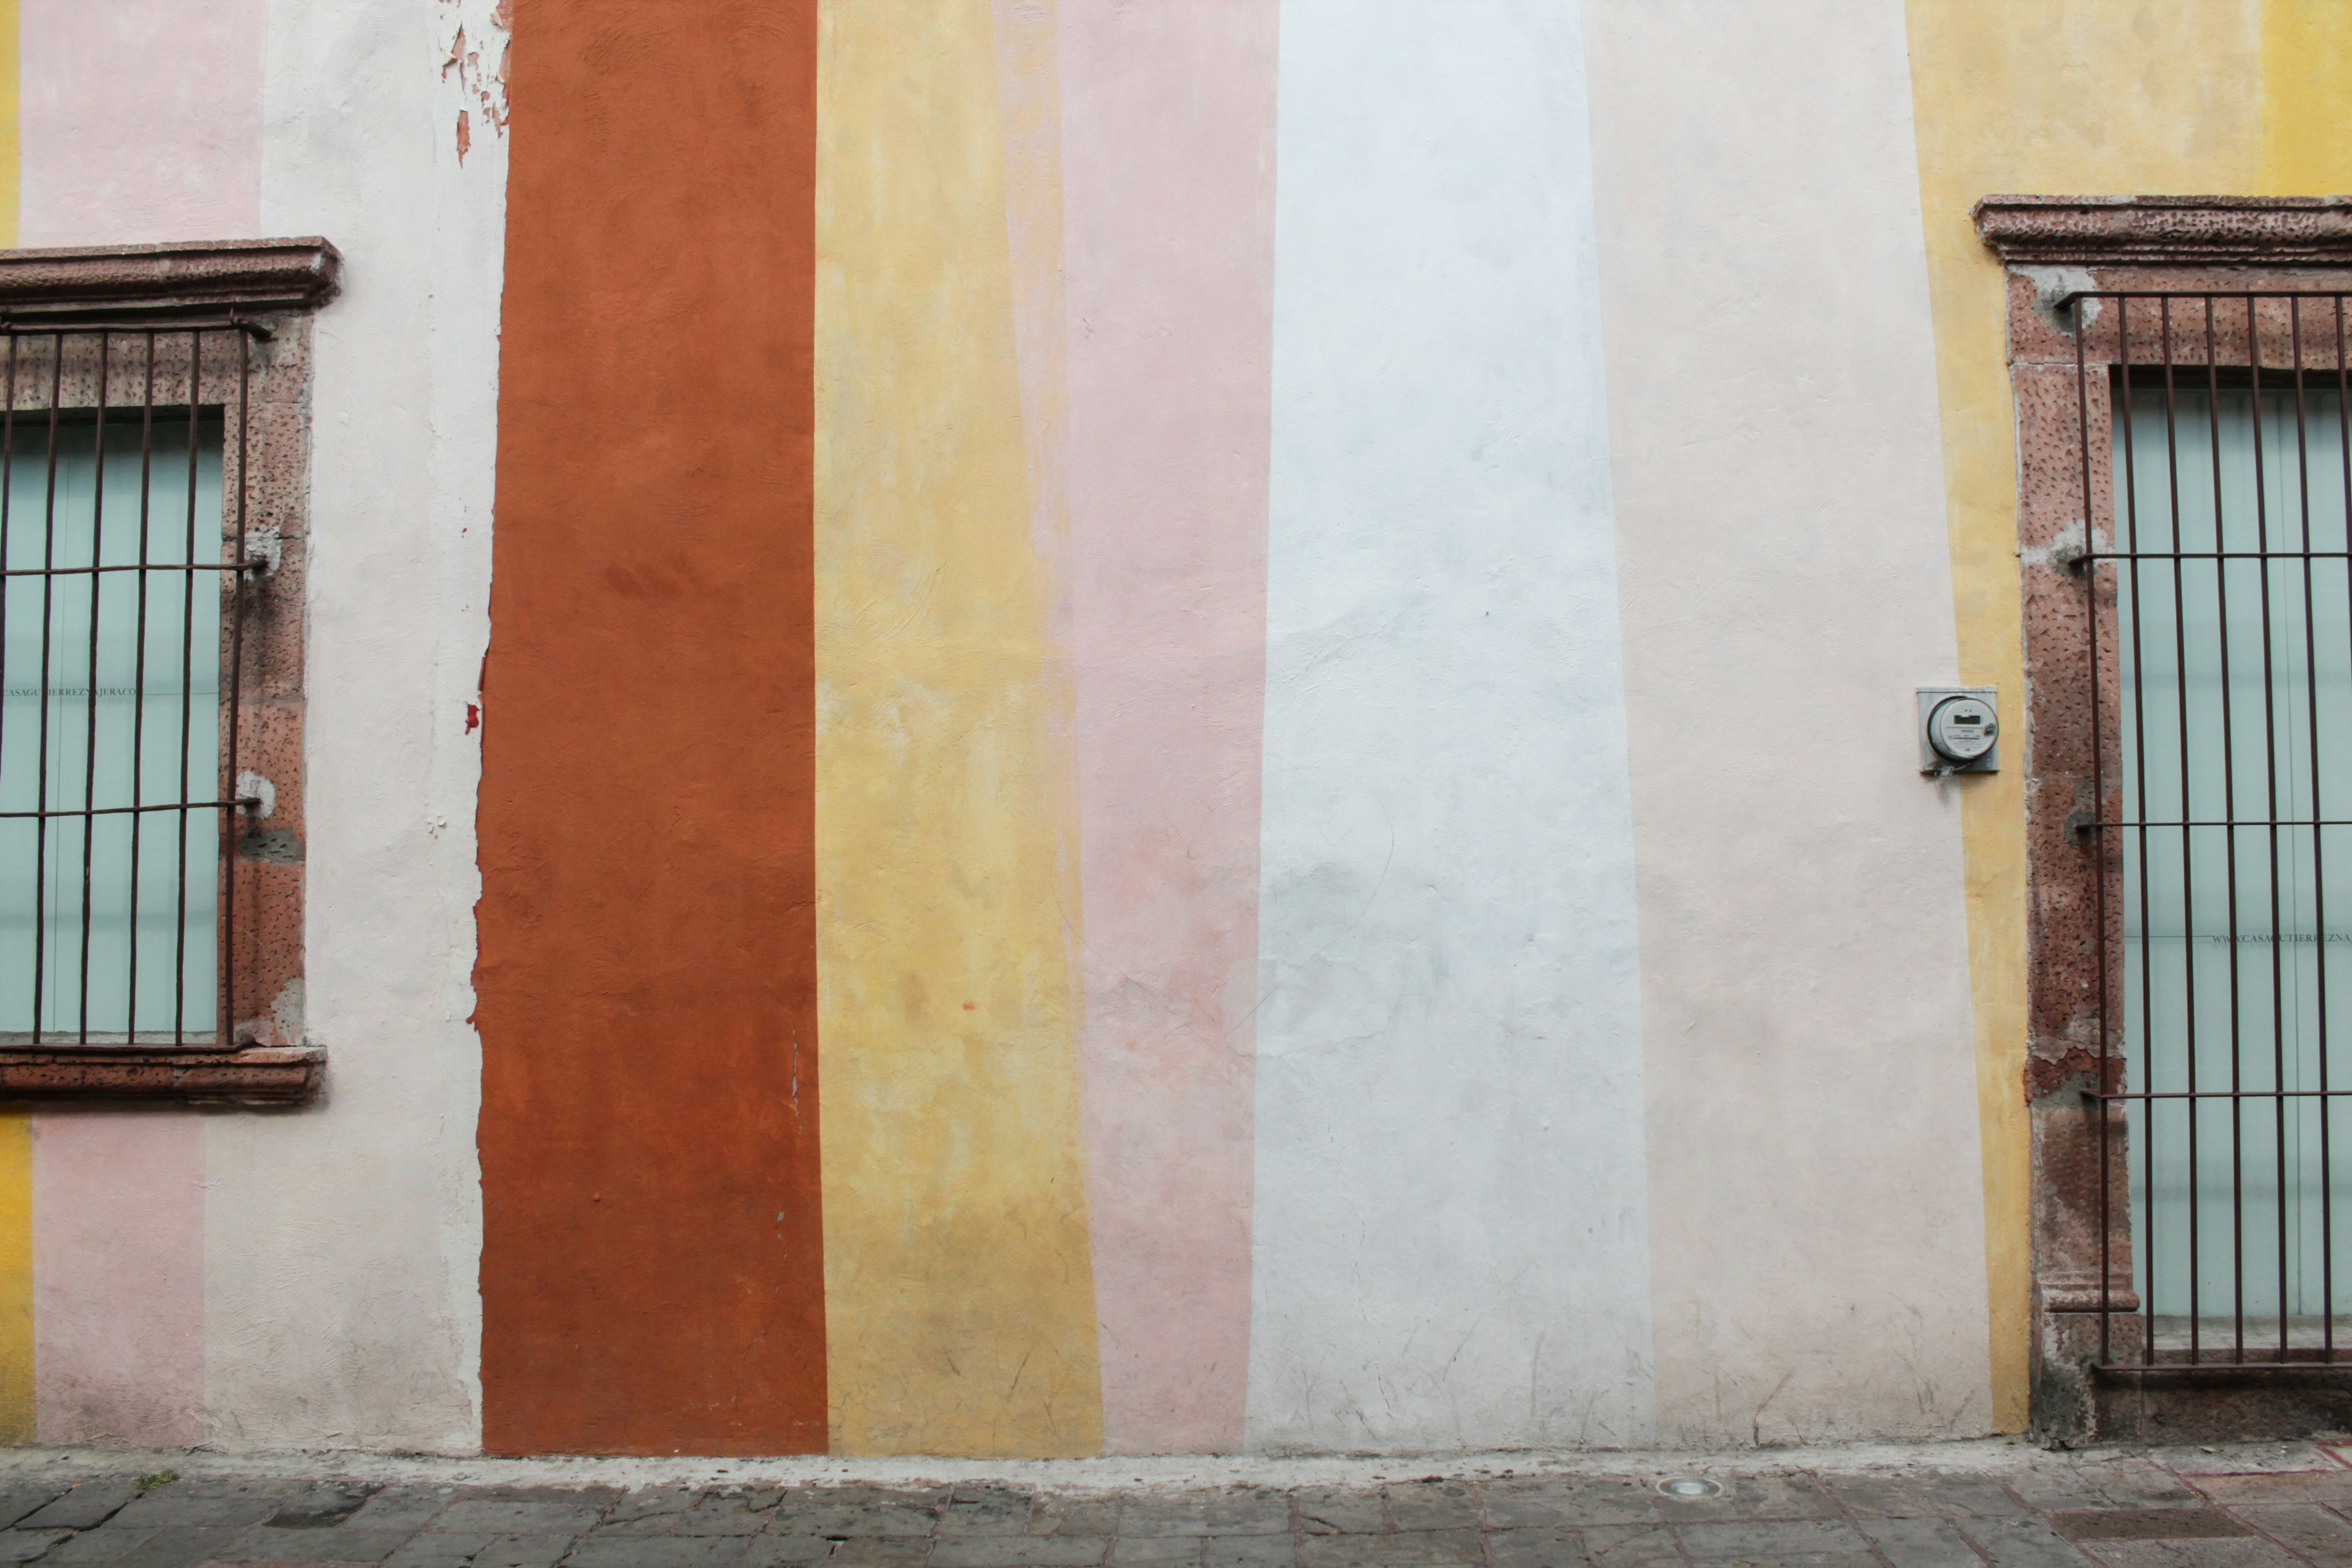 Walking around Querétaro we found this beautiful wall. The lines are crooked on purpose and I thought it was a great palette. Some girls were taking photos there (it’s super Instagram worthy) and had to wait some minutes for them to go and for cars to stop passing by. Worth it!